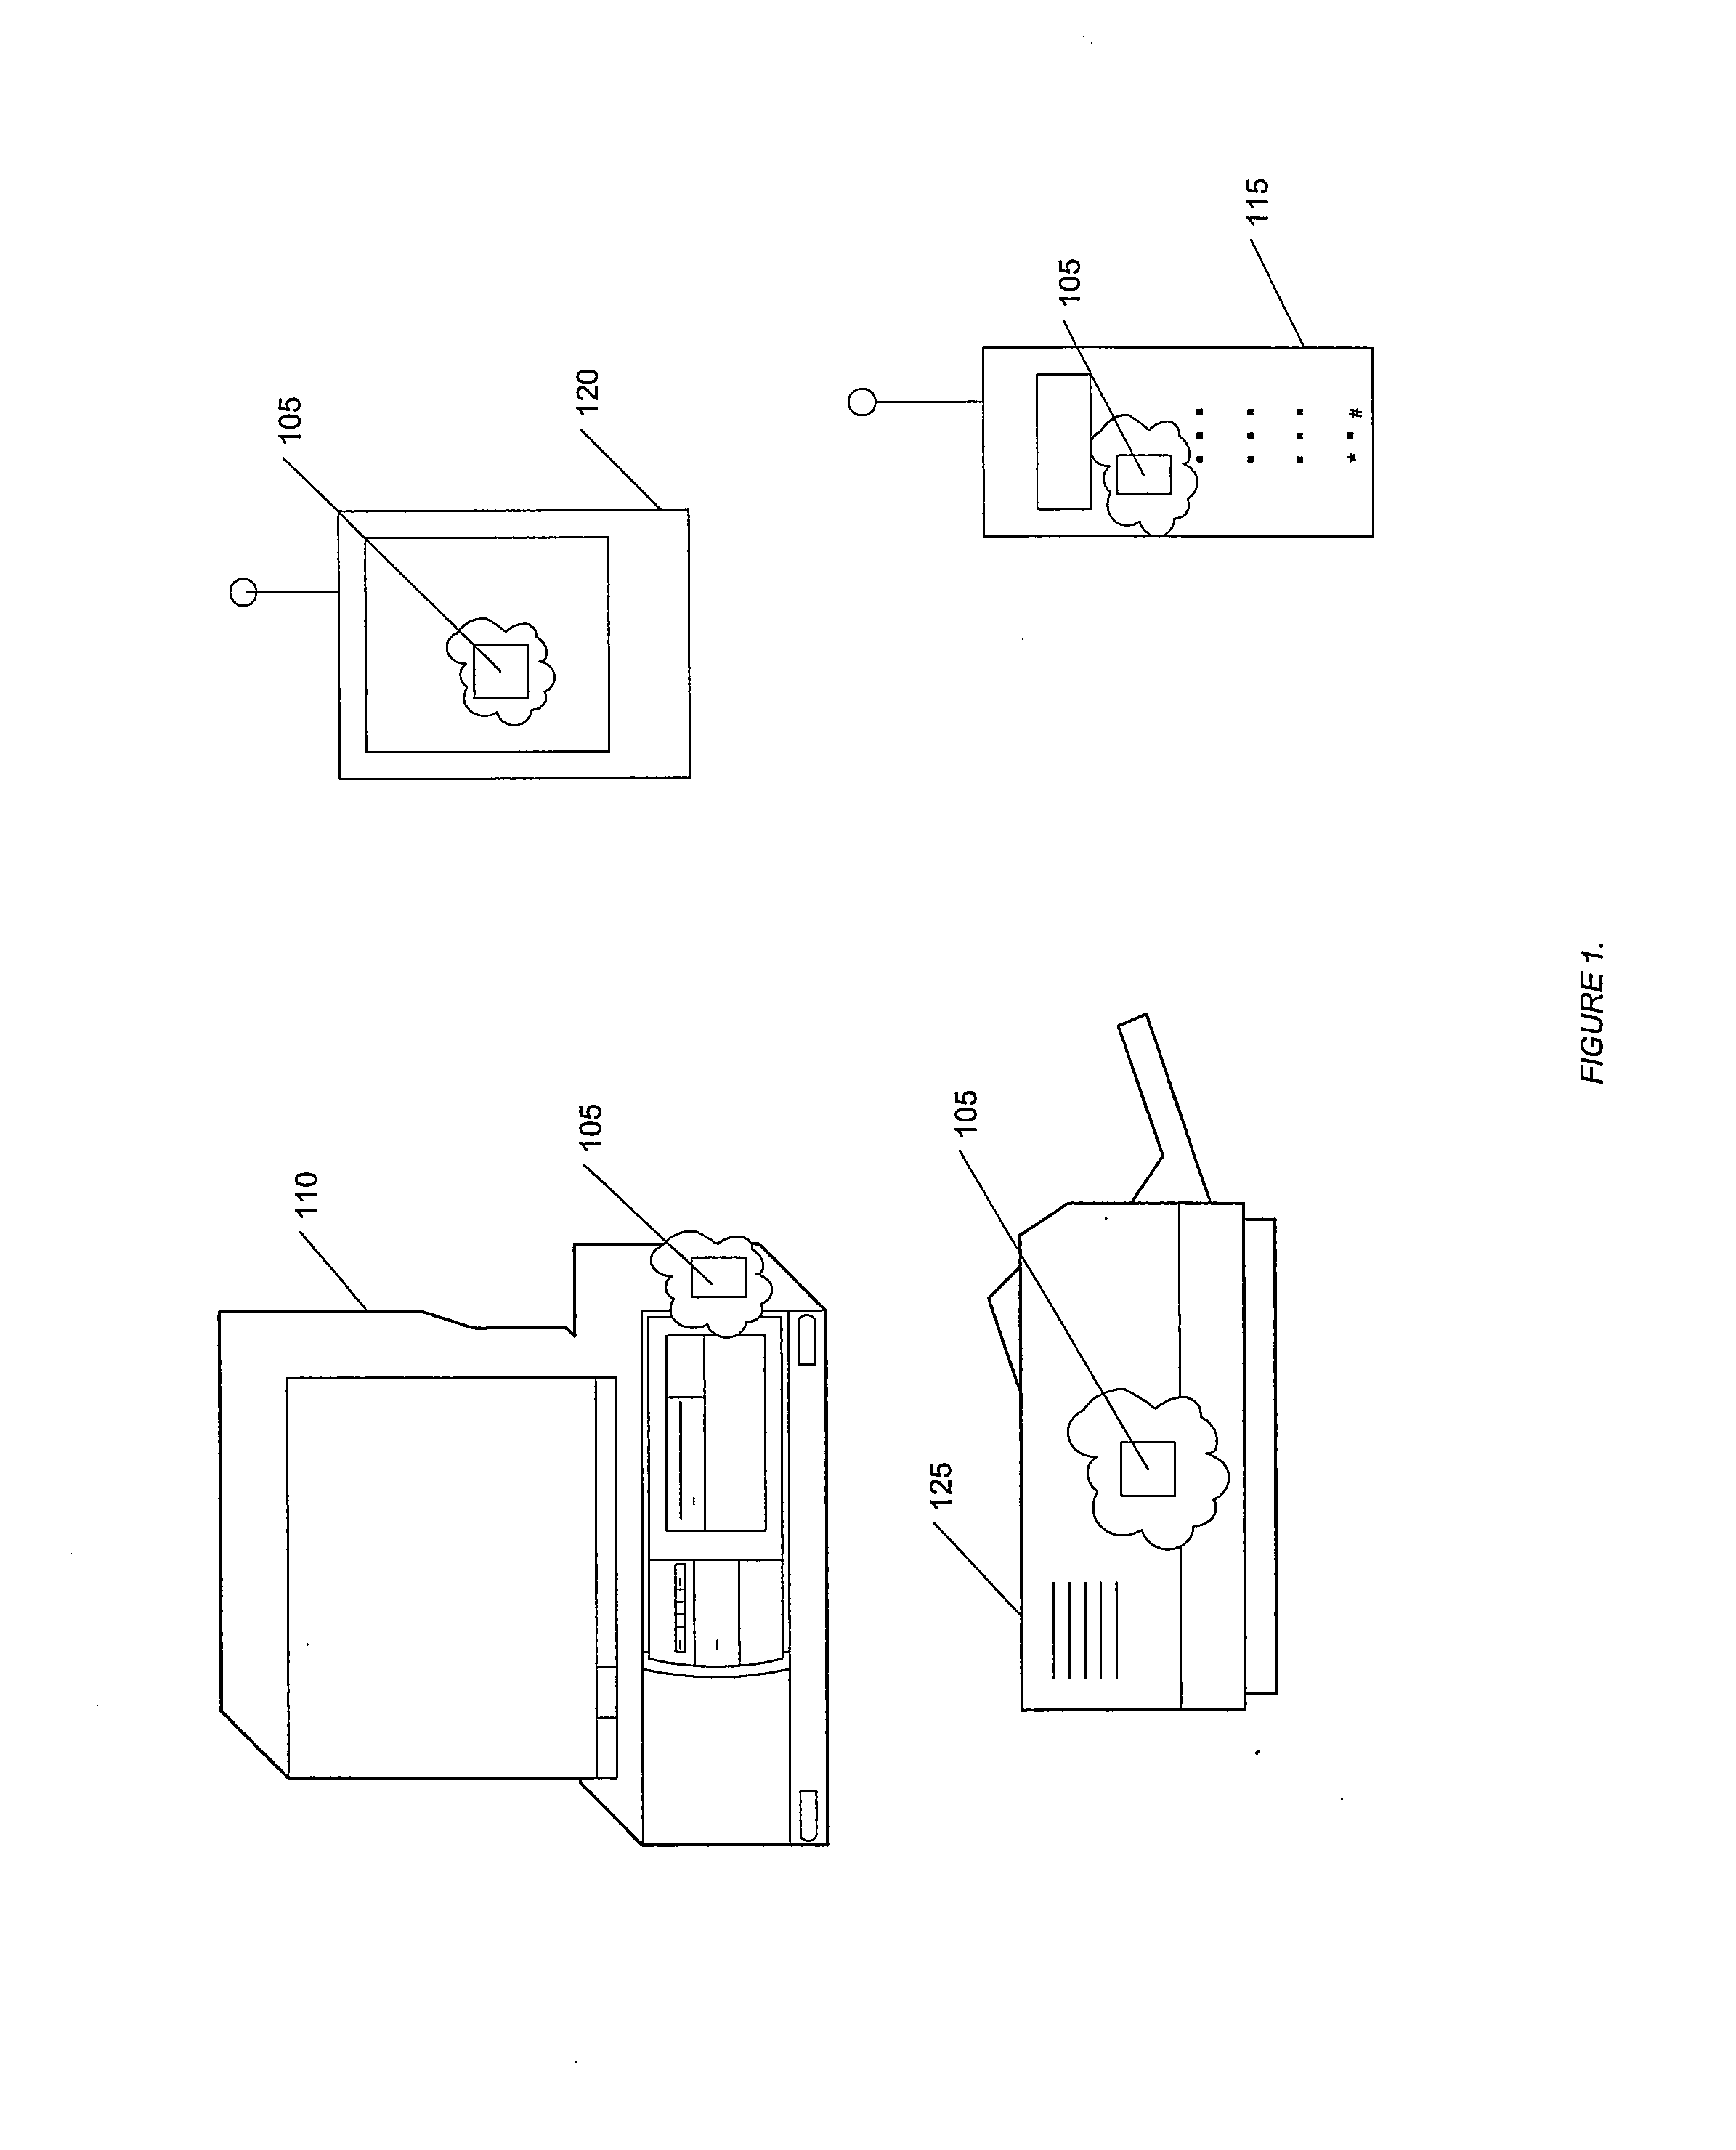 System and method for DC offset compensation and bit synchronization